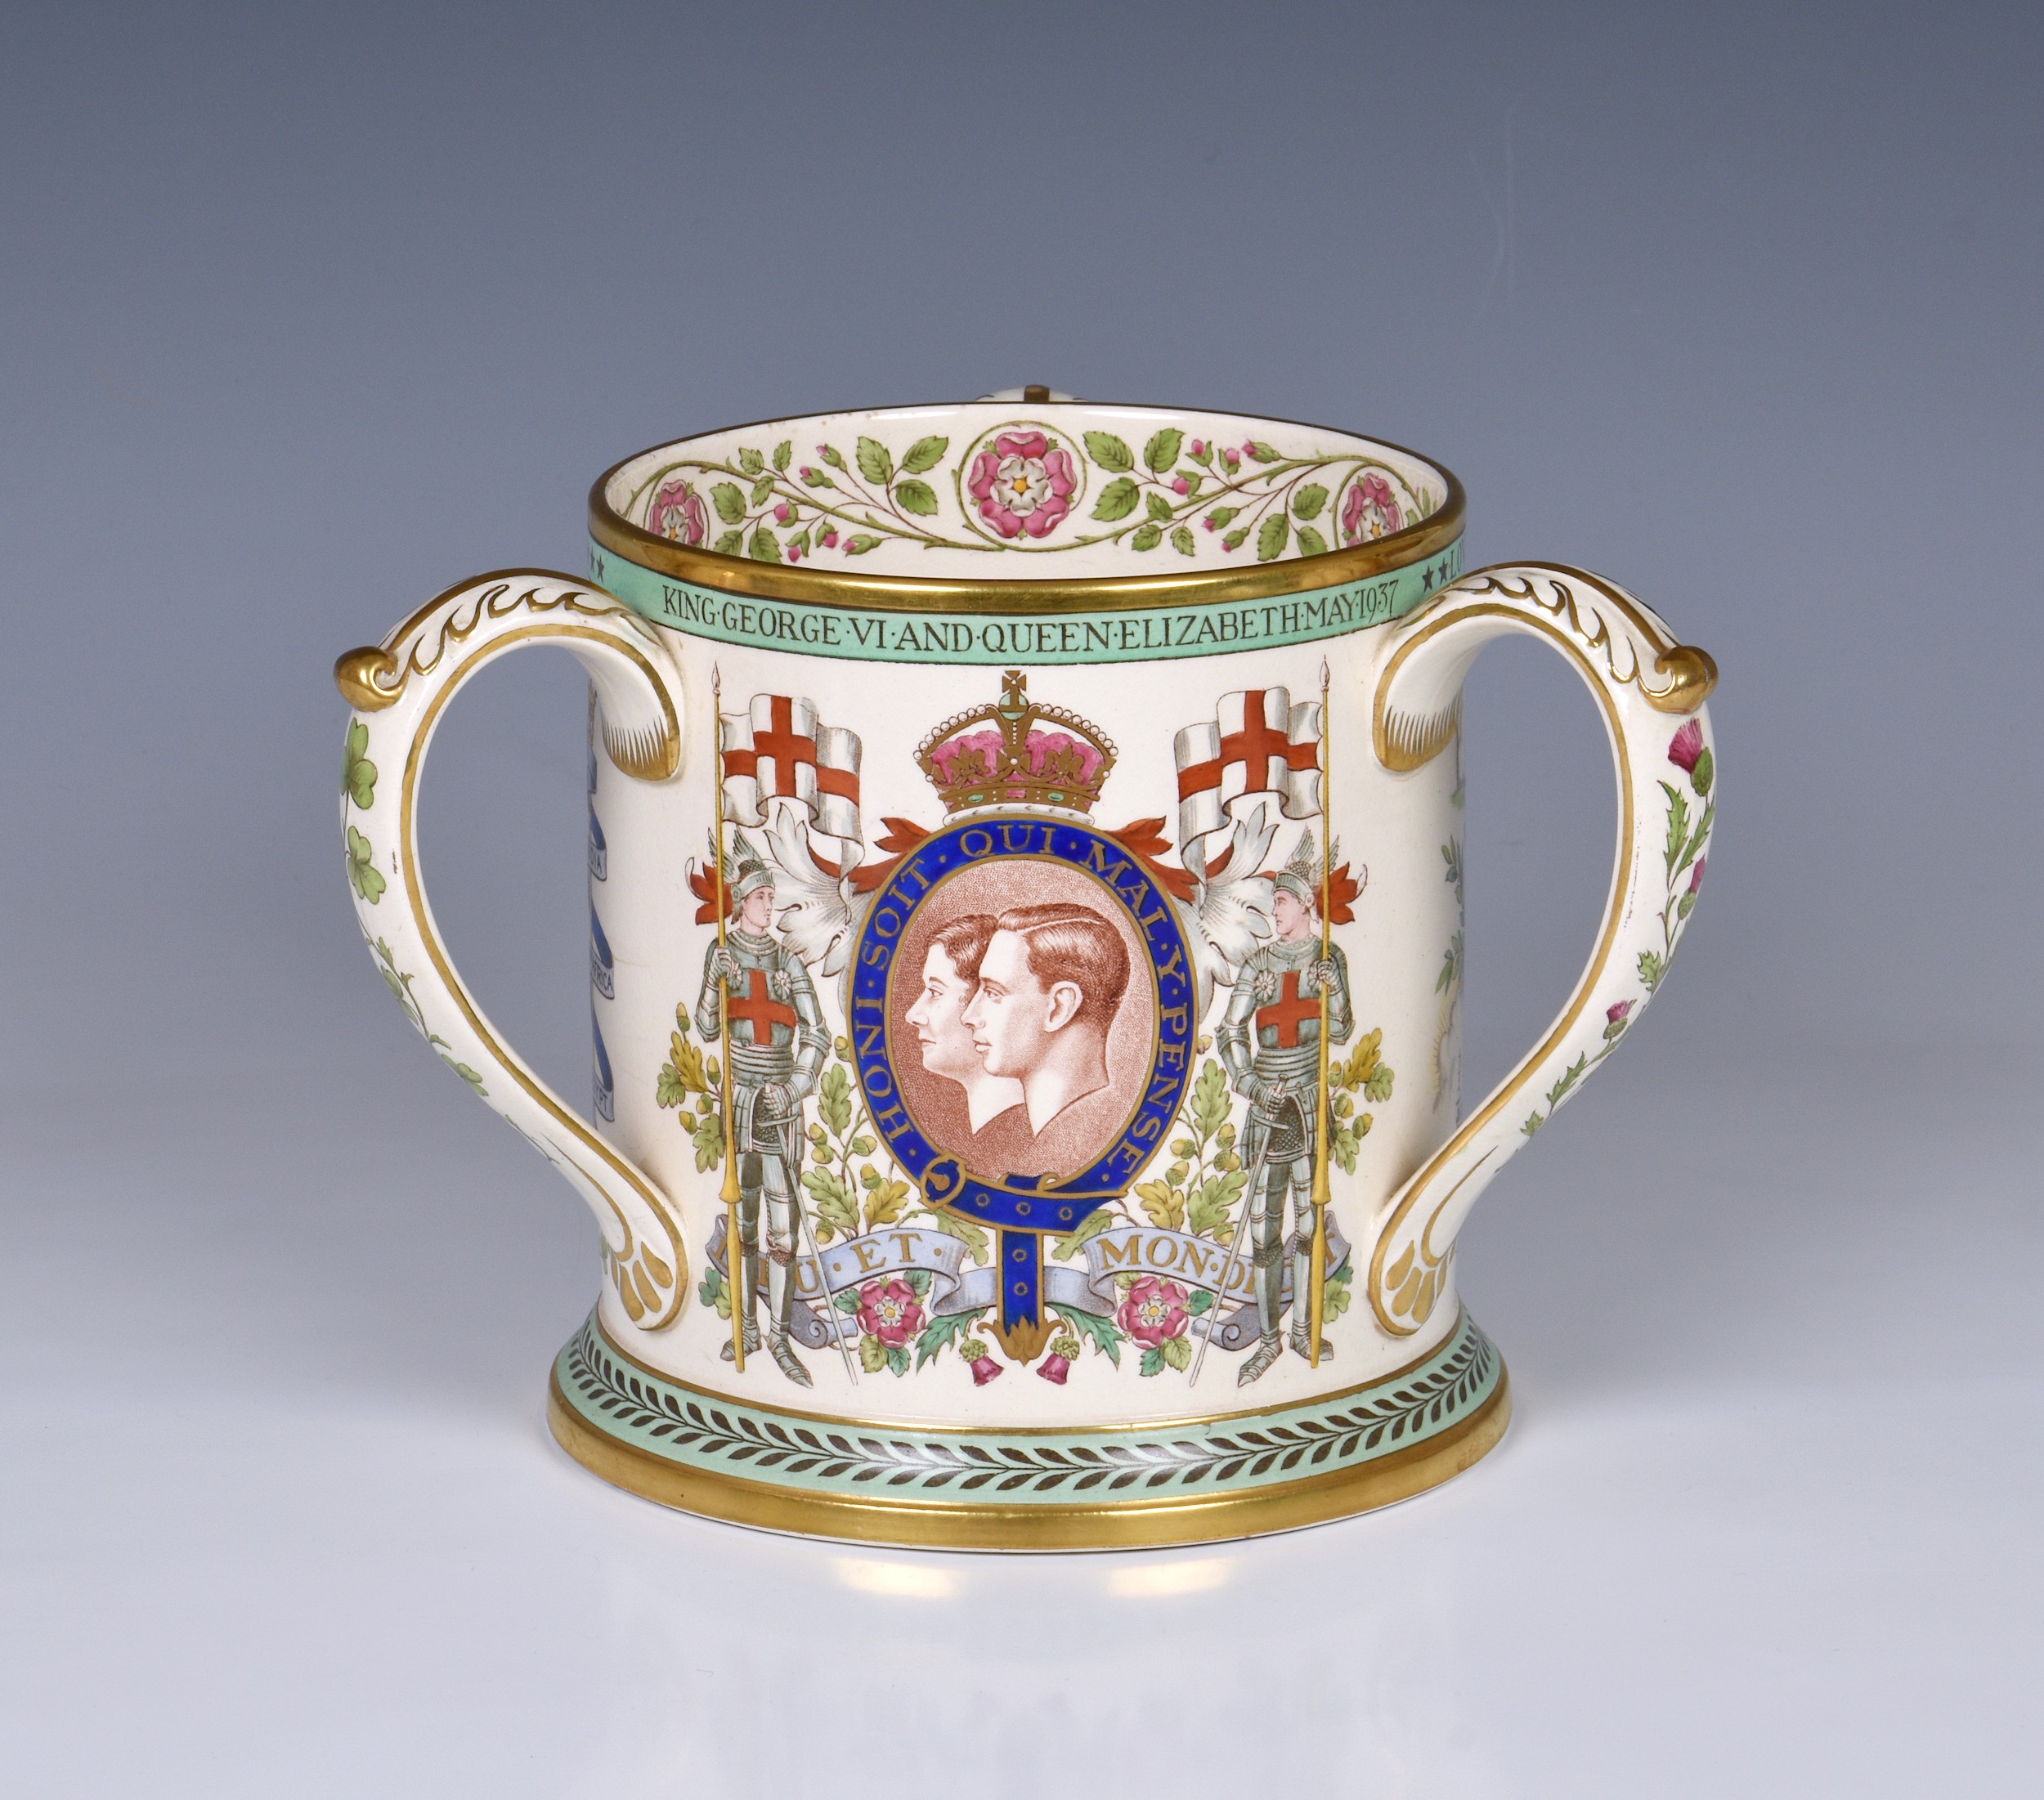 A rare large Spode-Copeland limited edition Royal commemorative tyg for the 1937 Coronation, printed